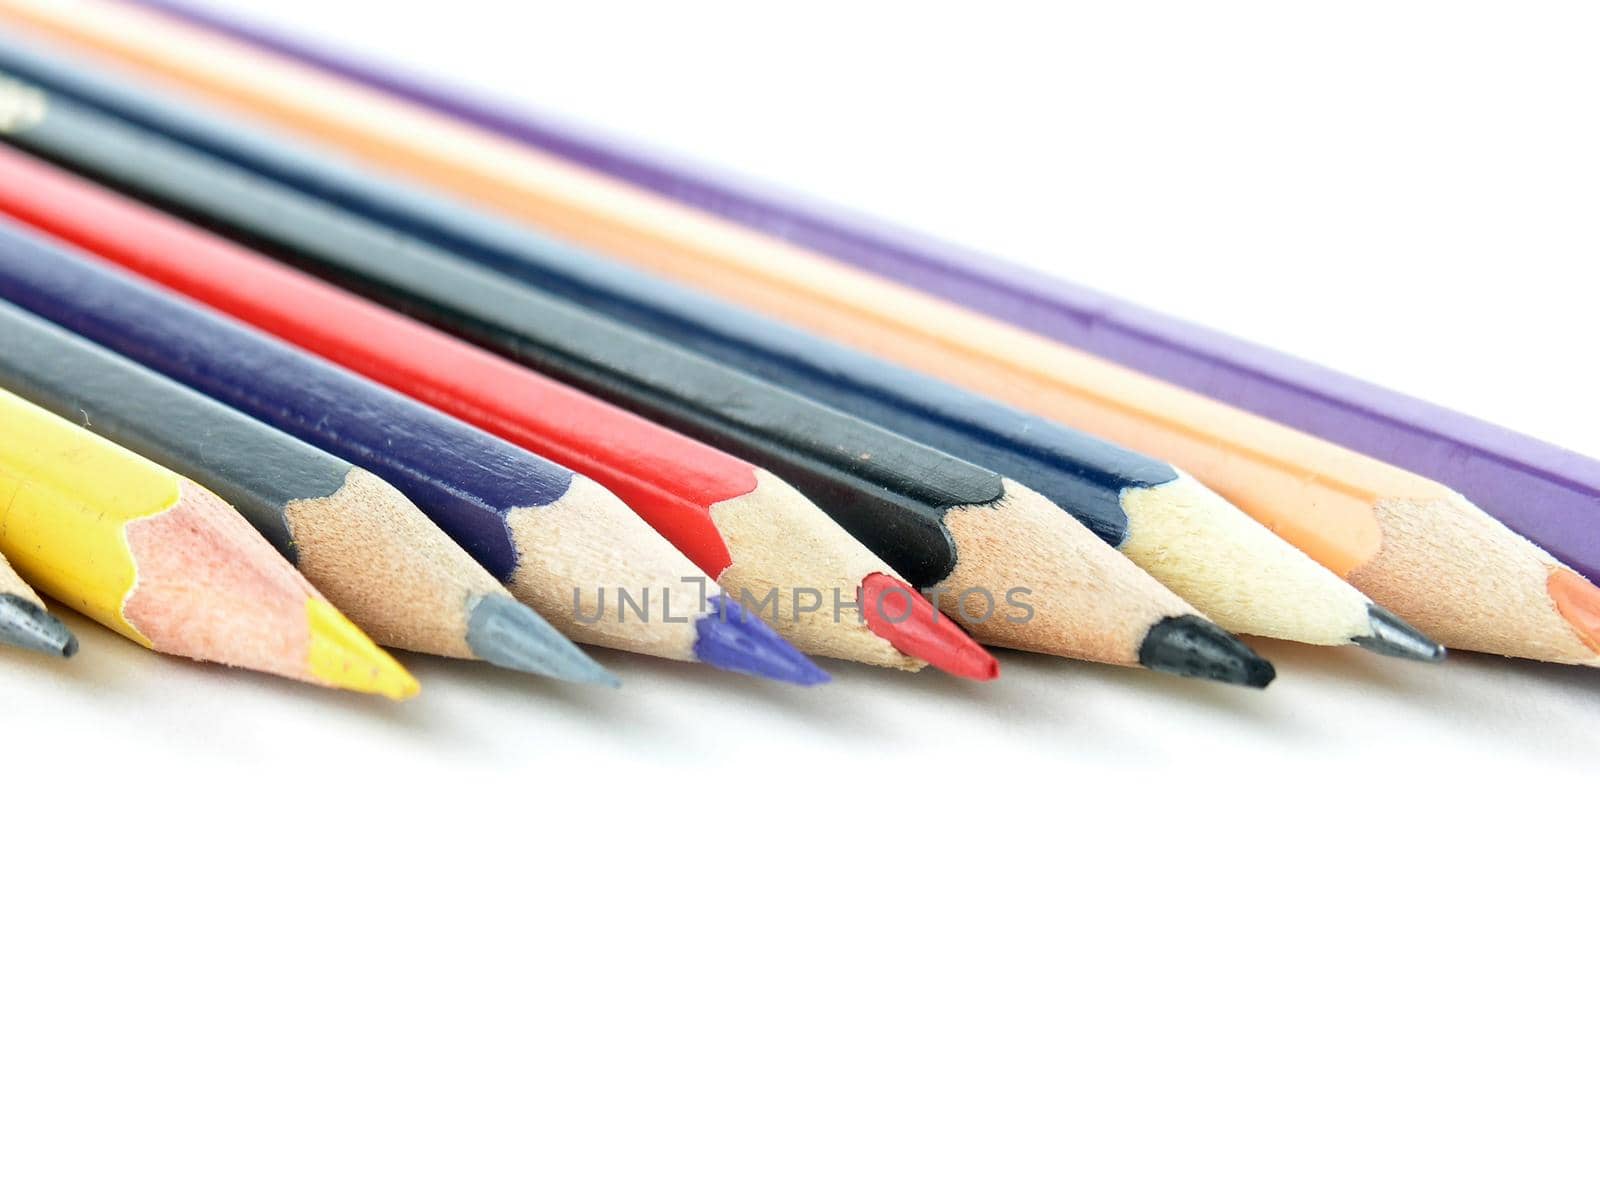 set of colored pencils on white background.photo with copy space by SmartPhotoLab